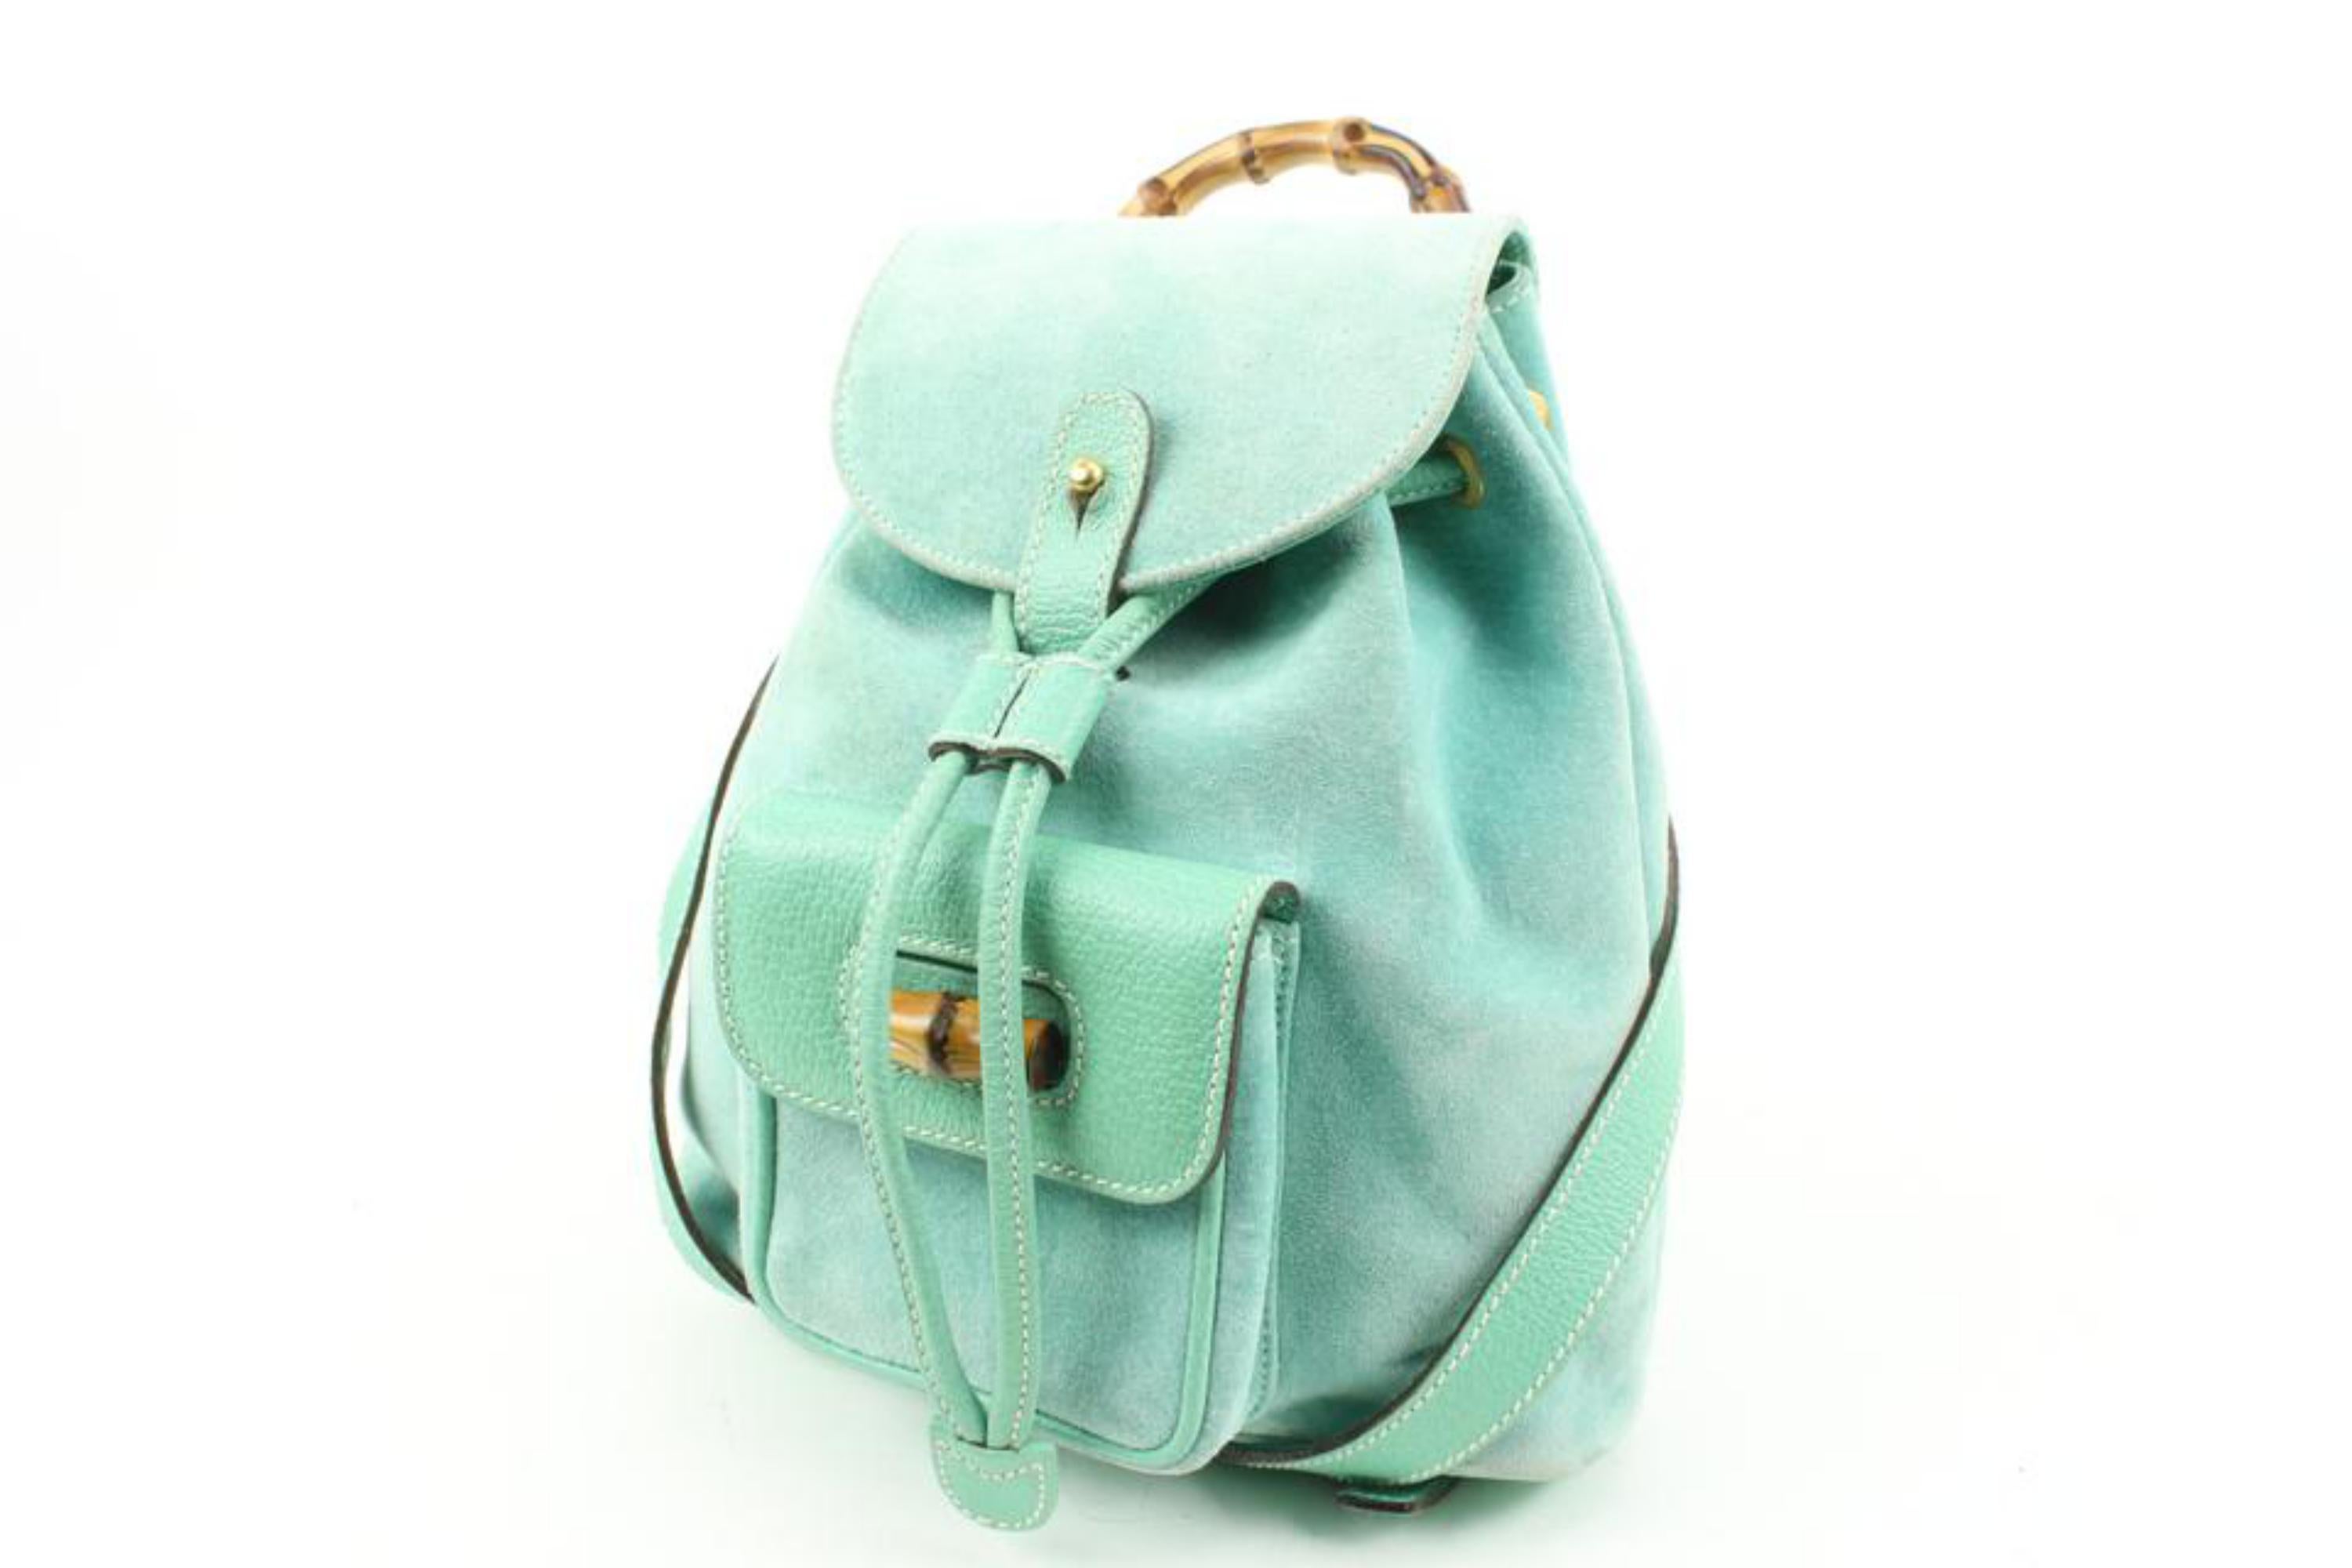 Gucci Rare Mint Green Suede Bamboo Mini Backpack 11g131s
Date Code/Serial Number: 003-2058-0030
Made In: Italy
Measurements: Length:  10